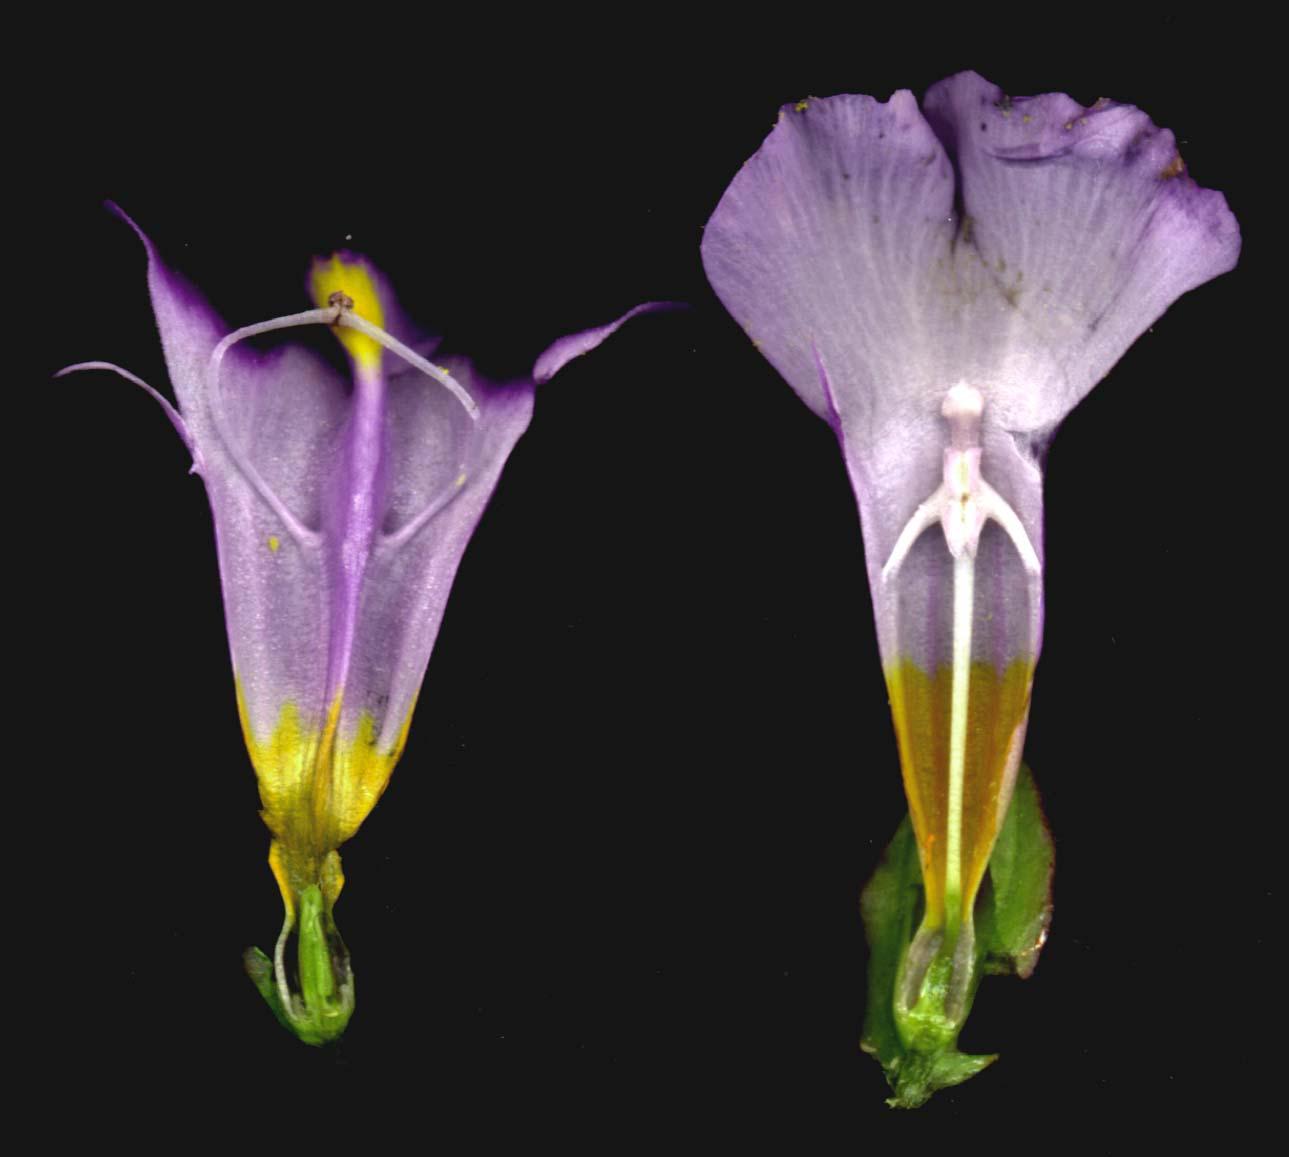 Foral dissection of Torenia